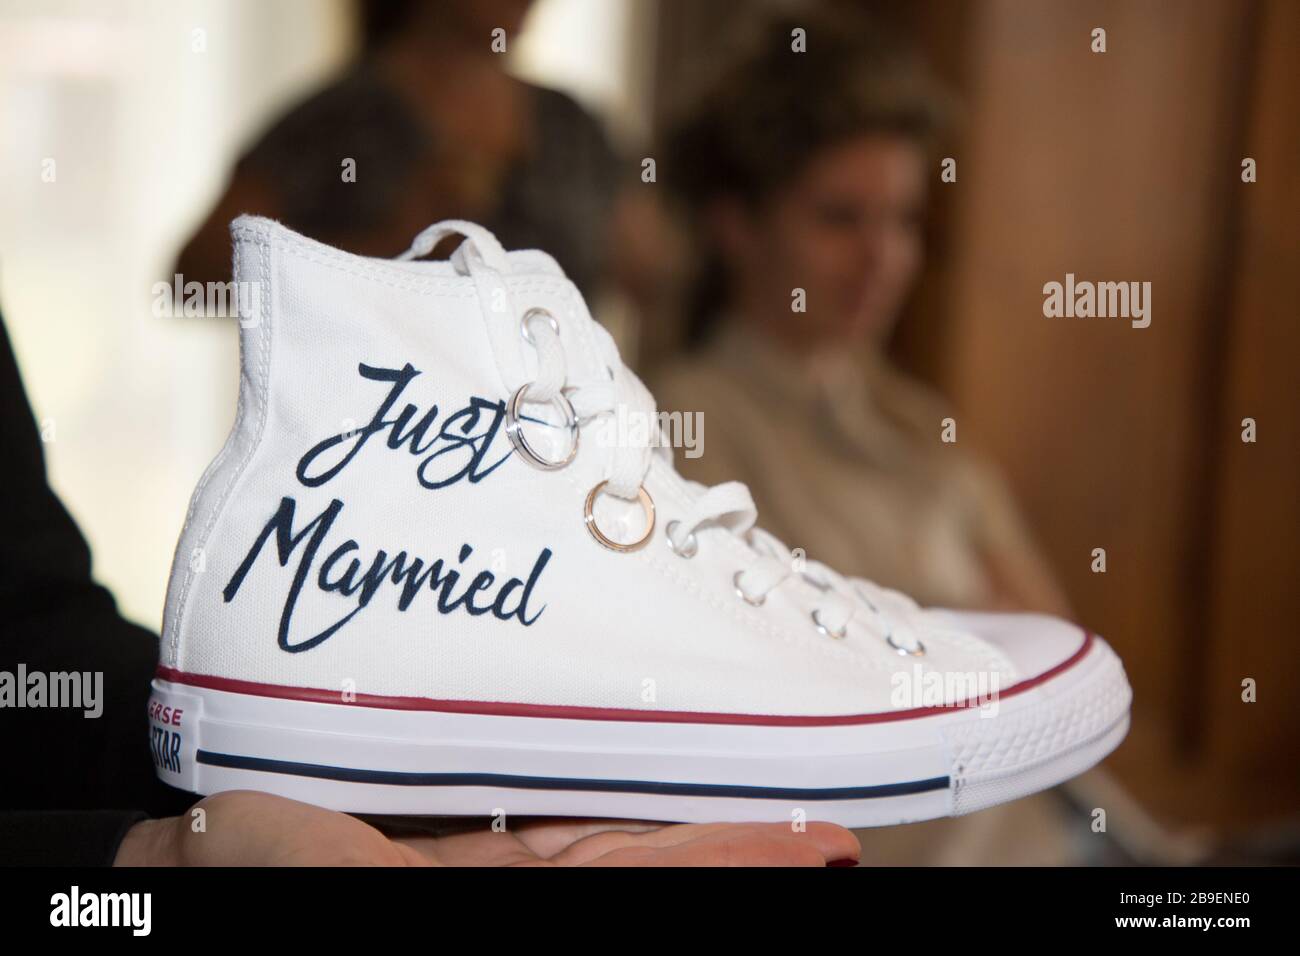 Bordeaux , Aquitaine / France - 01 15 2020 : Bride wedding rings in just  married white Sneakers converse all star chuck taylor in wedding prepation  ba Stock Photo - Alamy